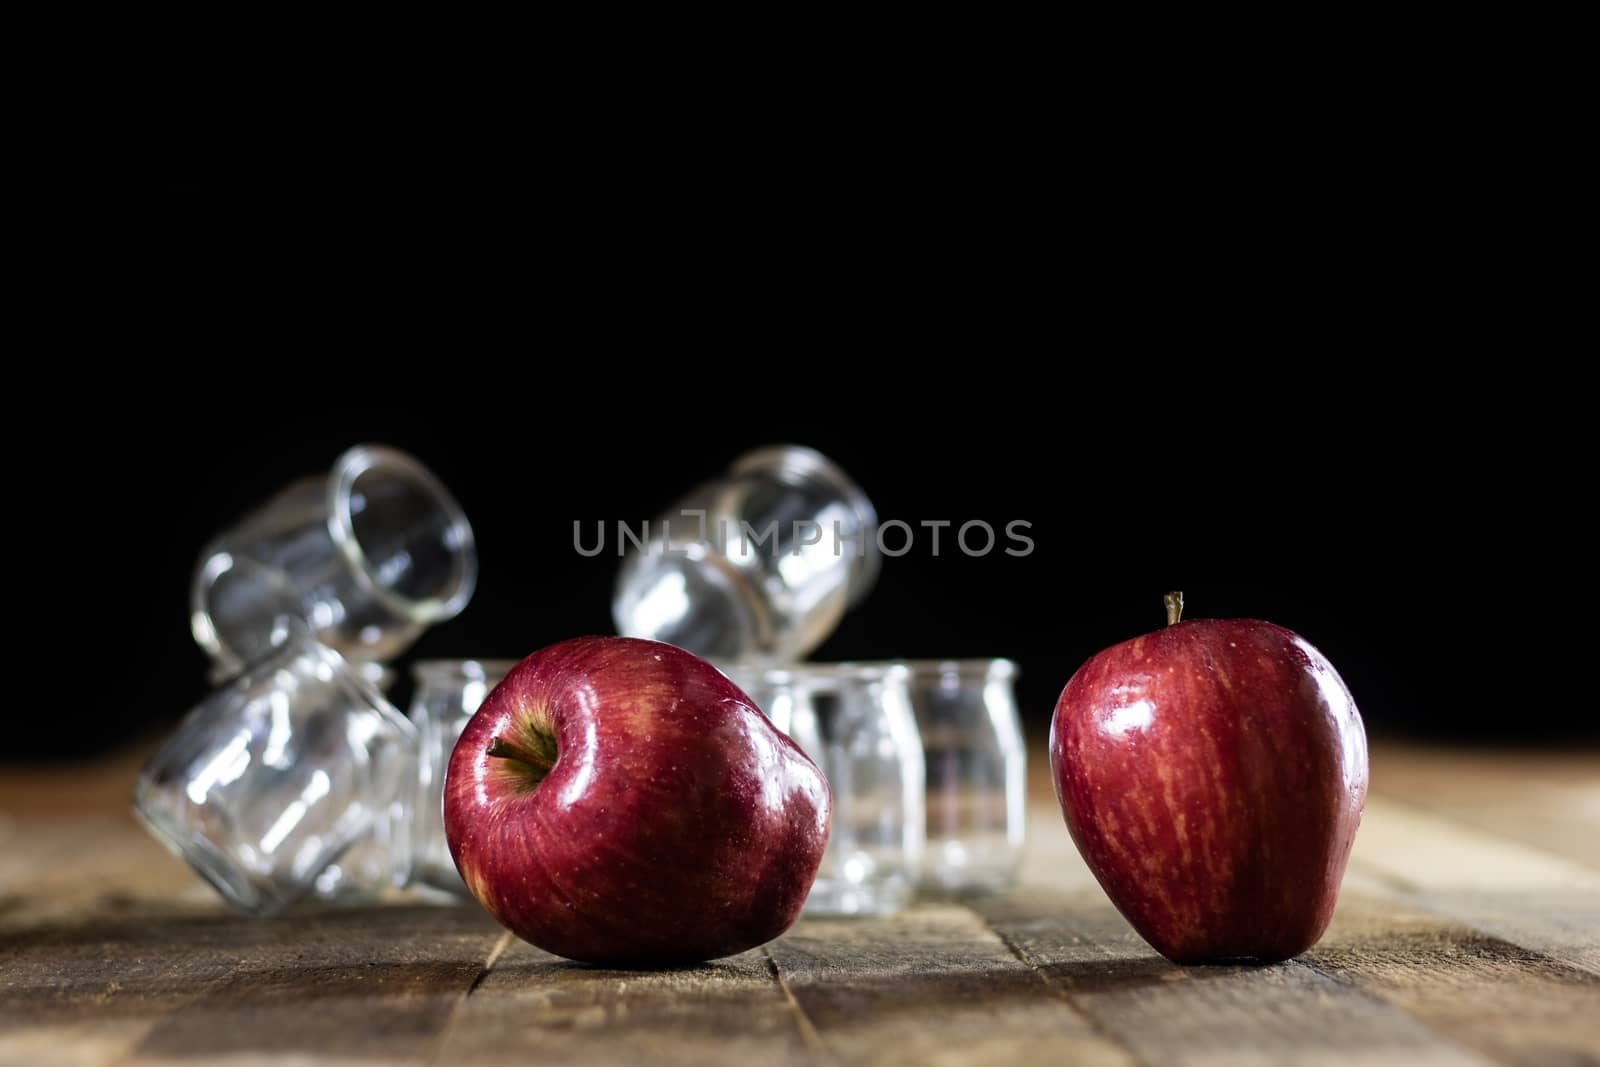 Mortar on a wooden table and empty jars, black background